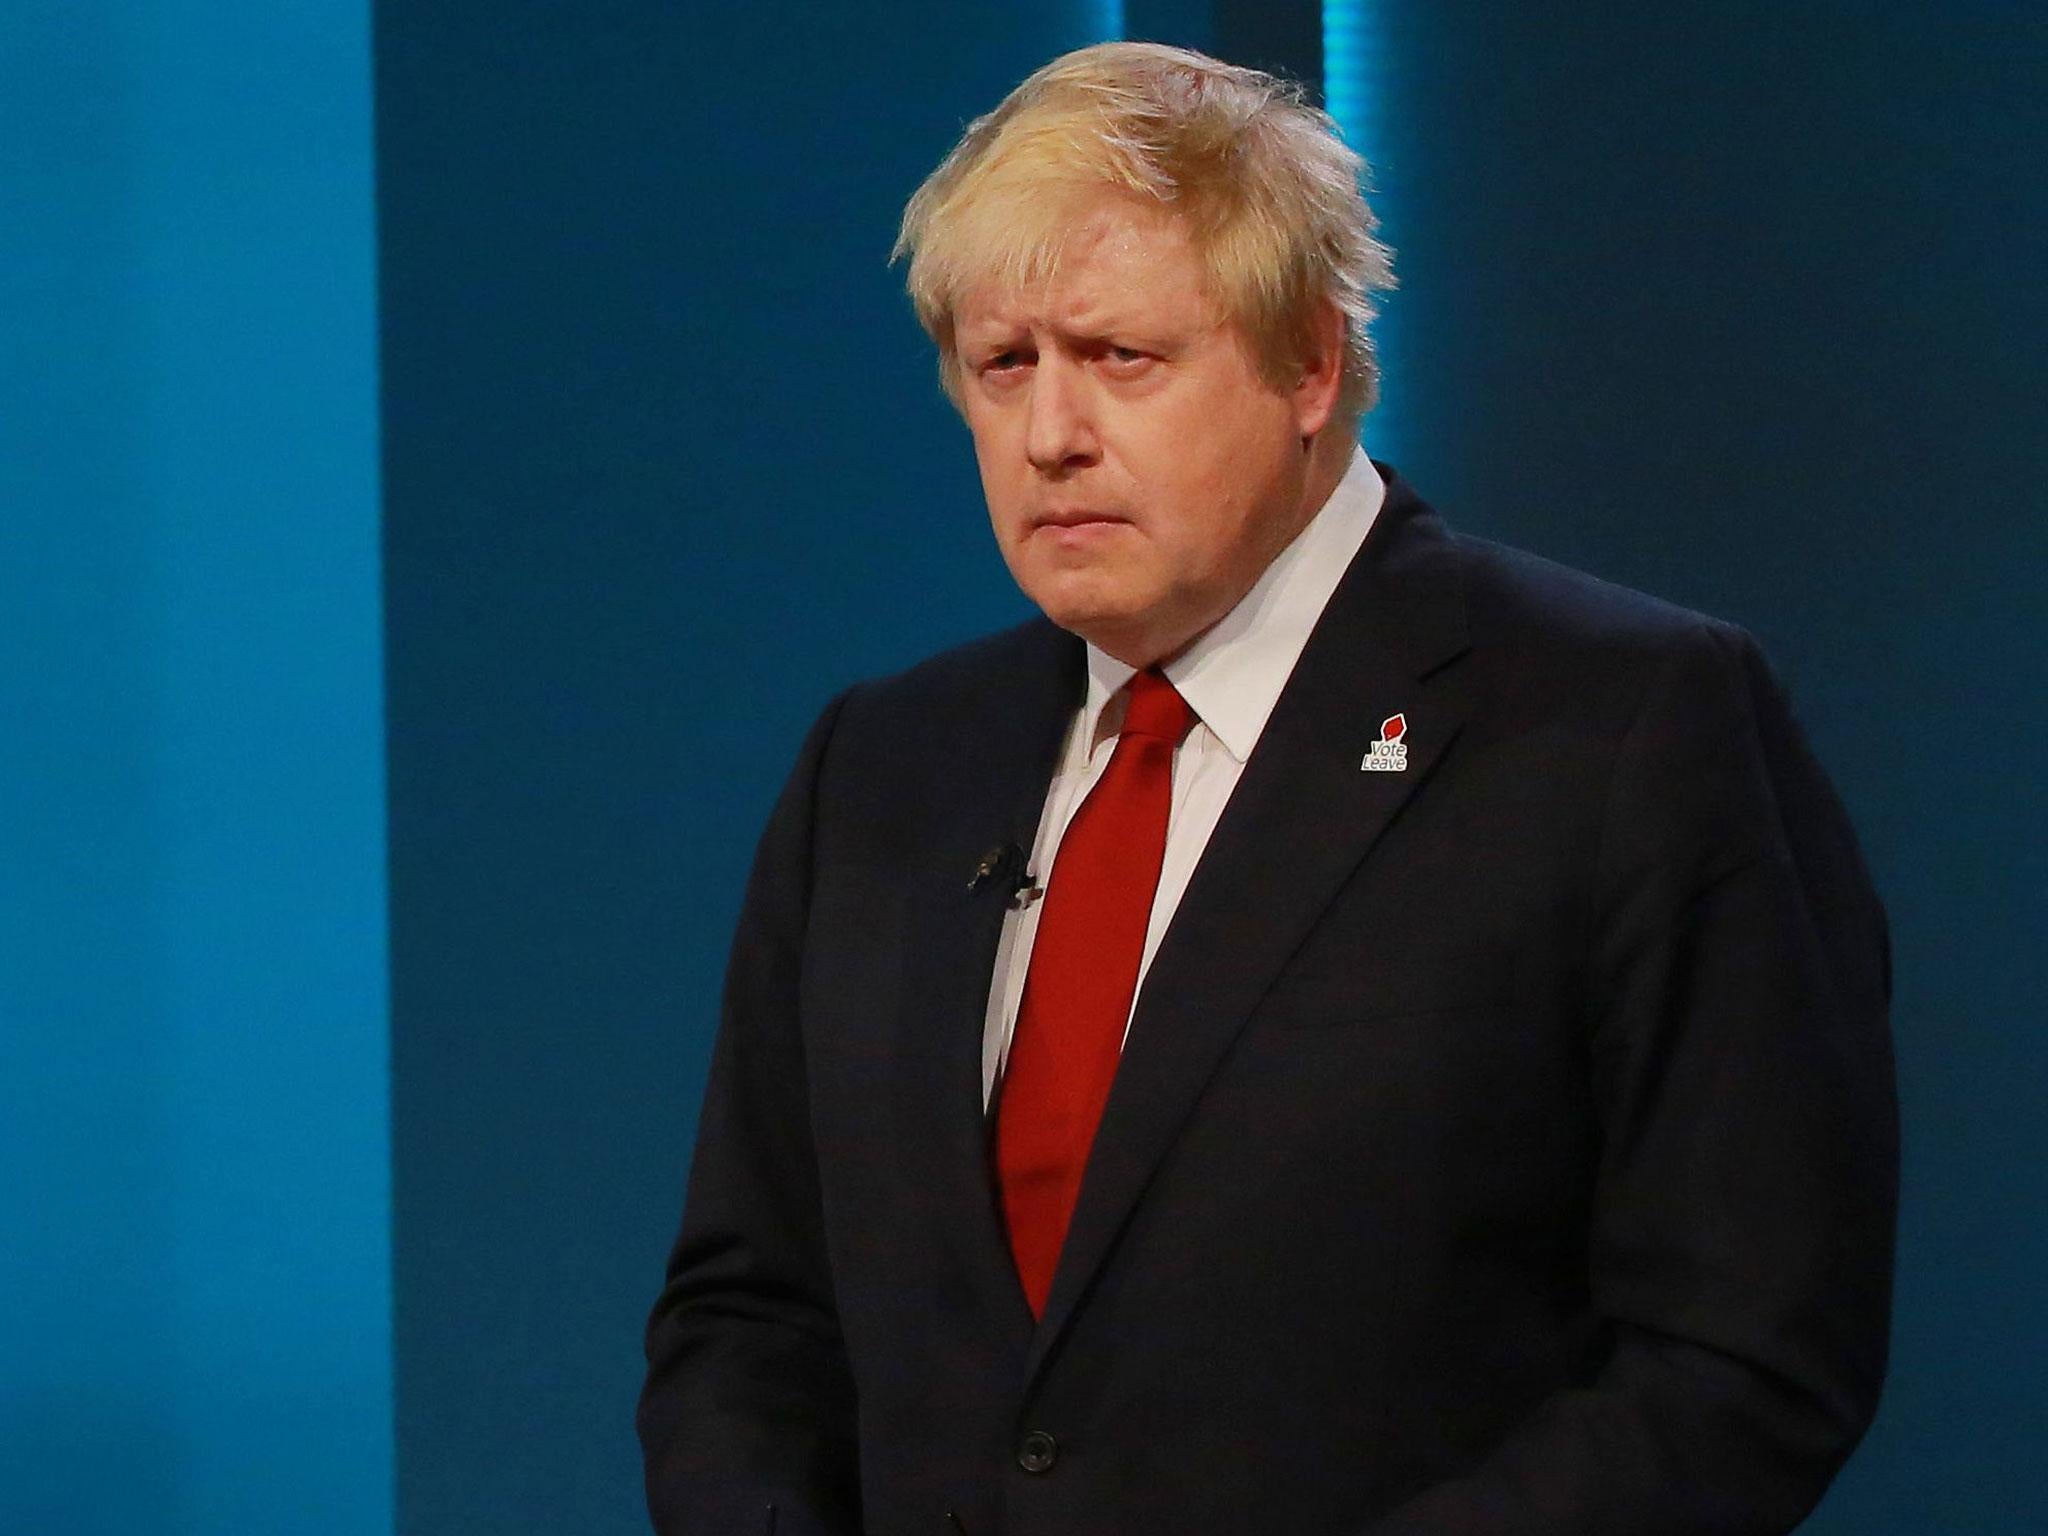 Boris Johnson was subjected to repeated personal attacks - including from Tory minister Amber Rudd - during an ITV EU debate